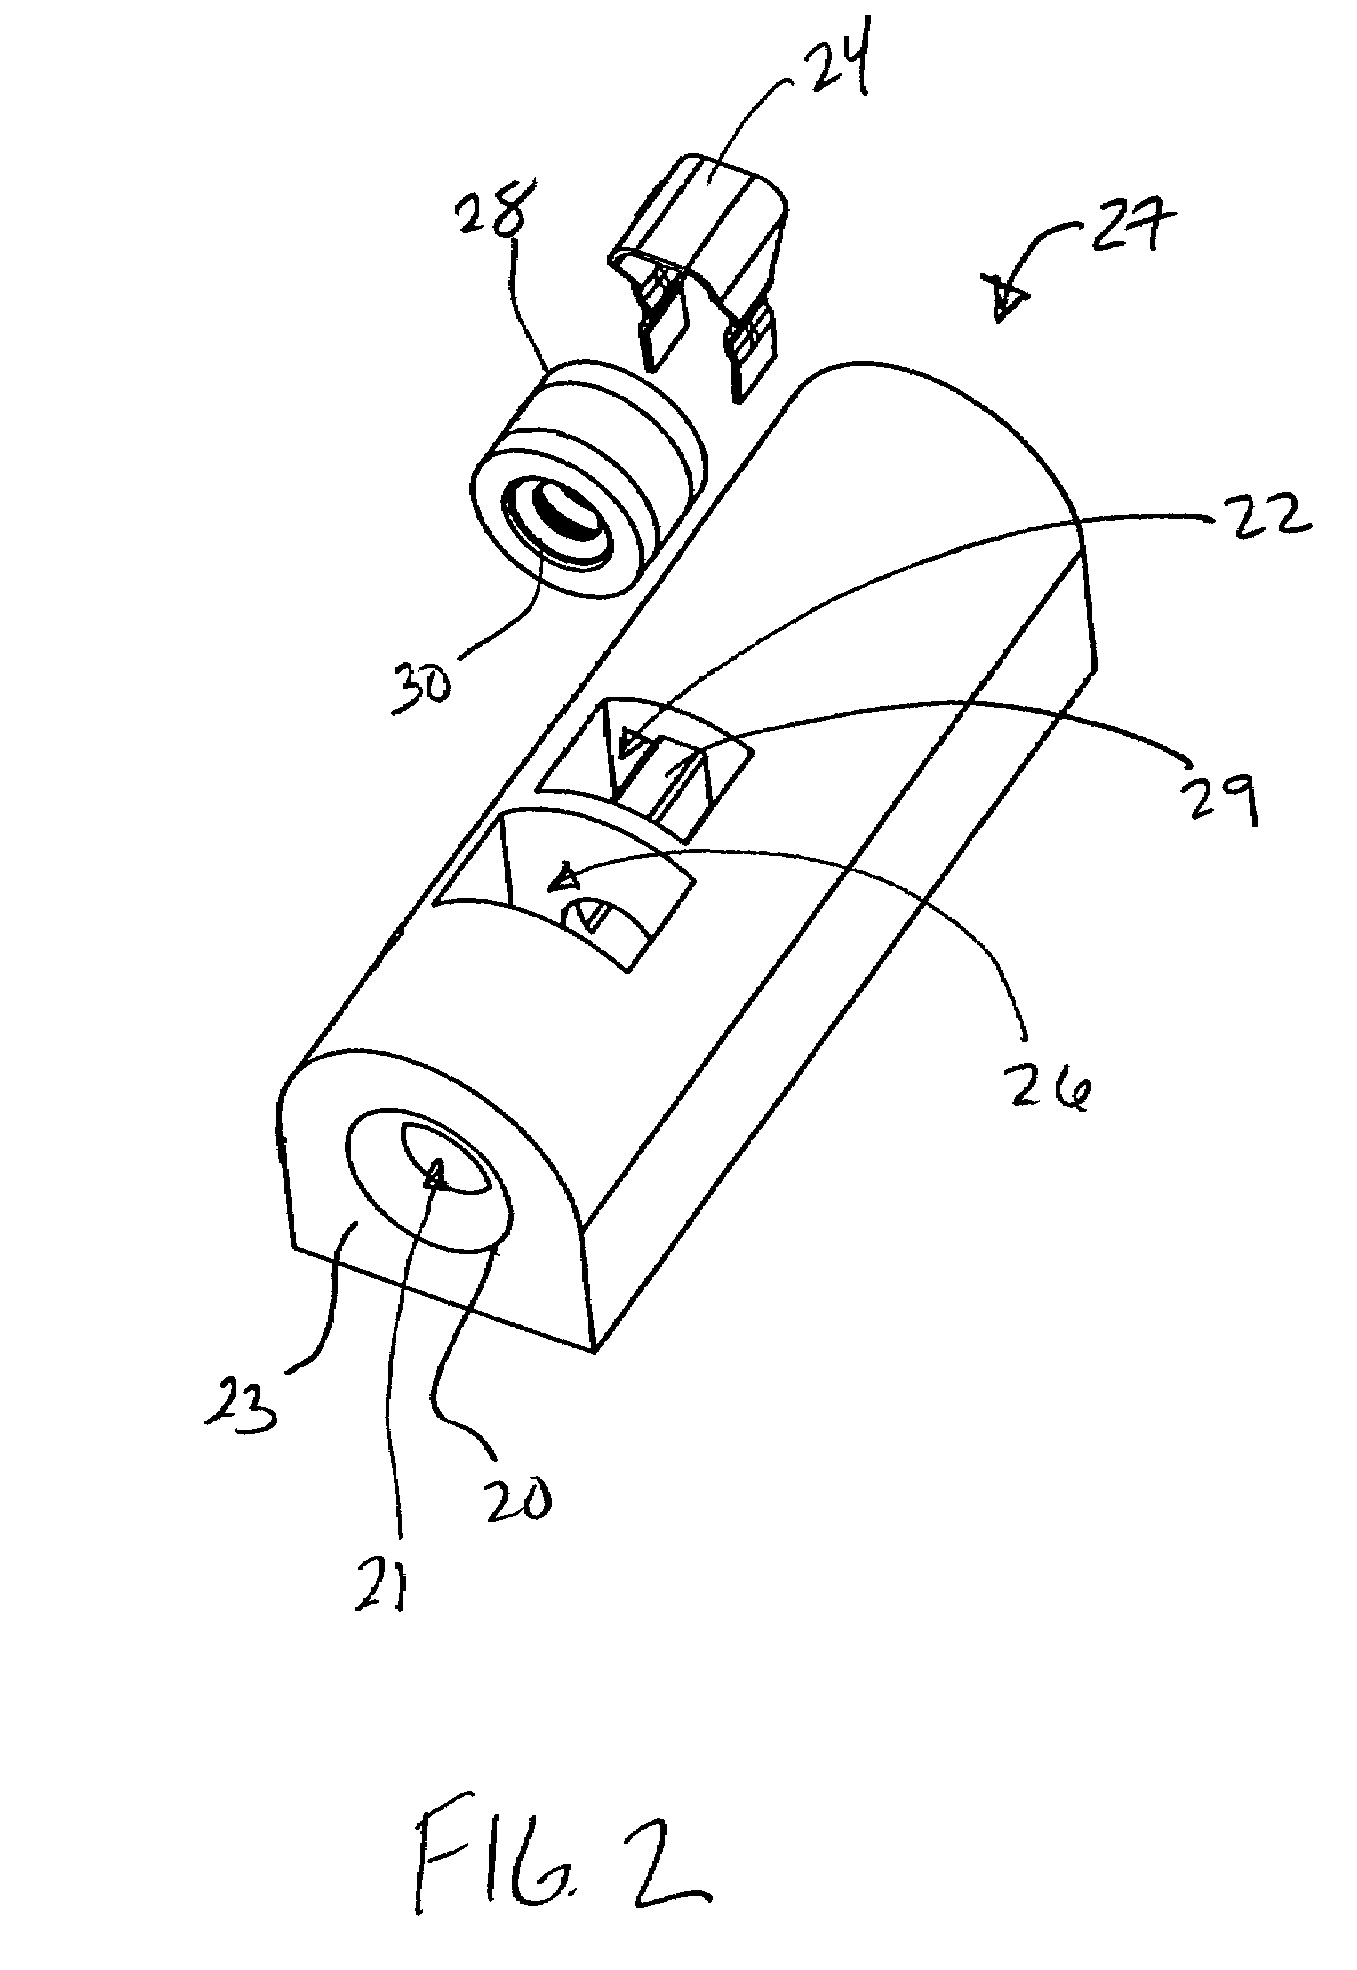 Connector assembly for connecting a lead and an implantable medical device